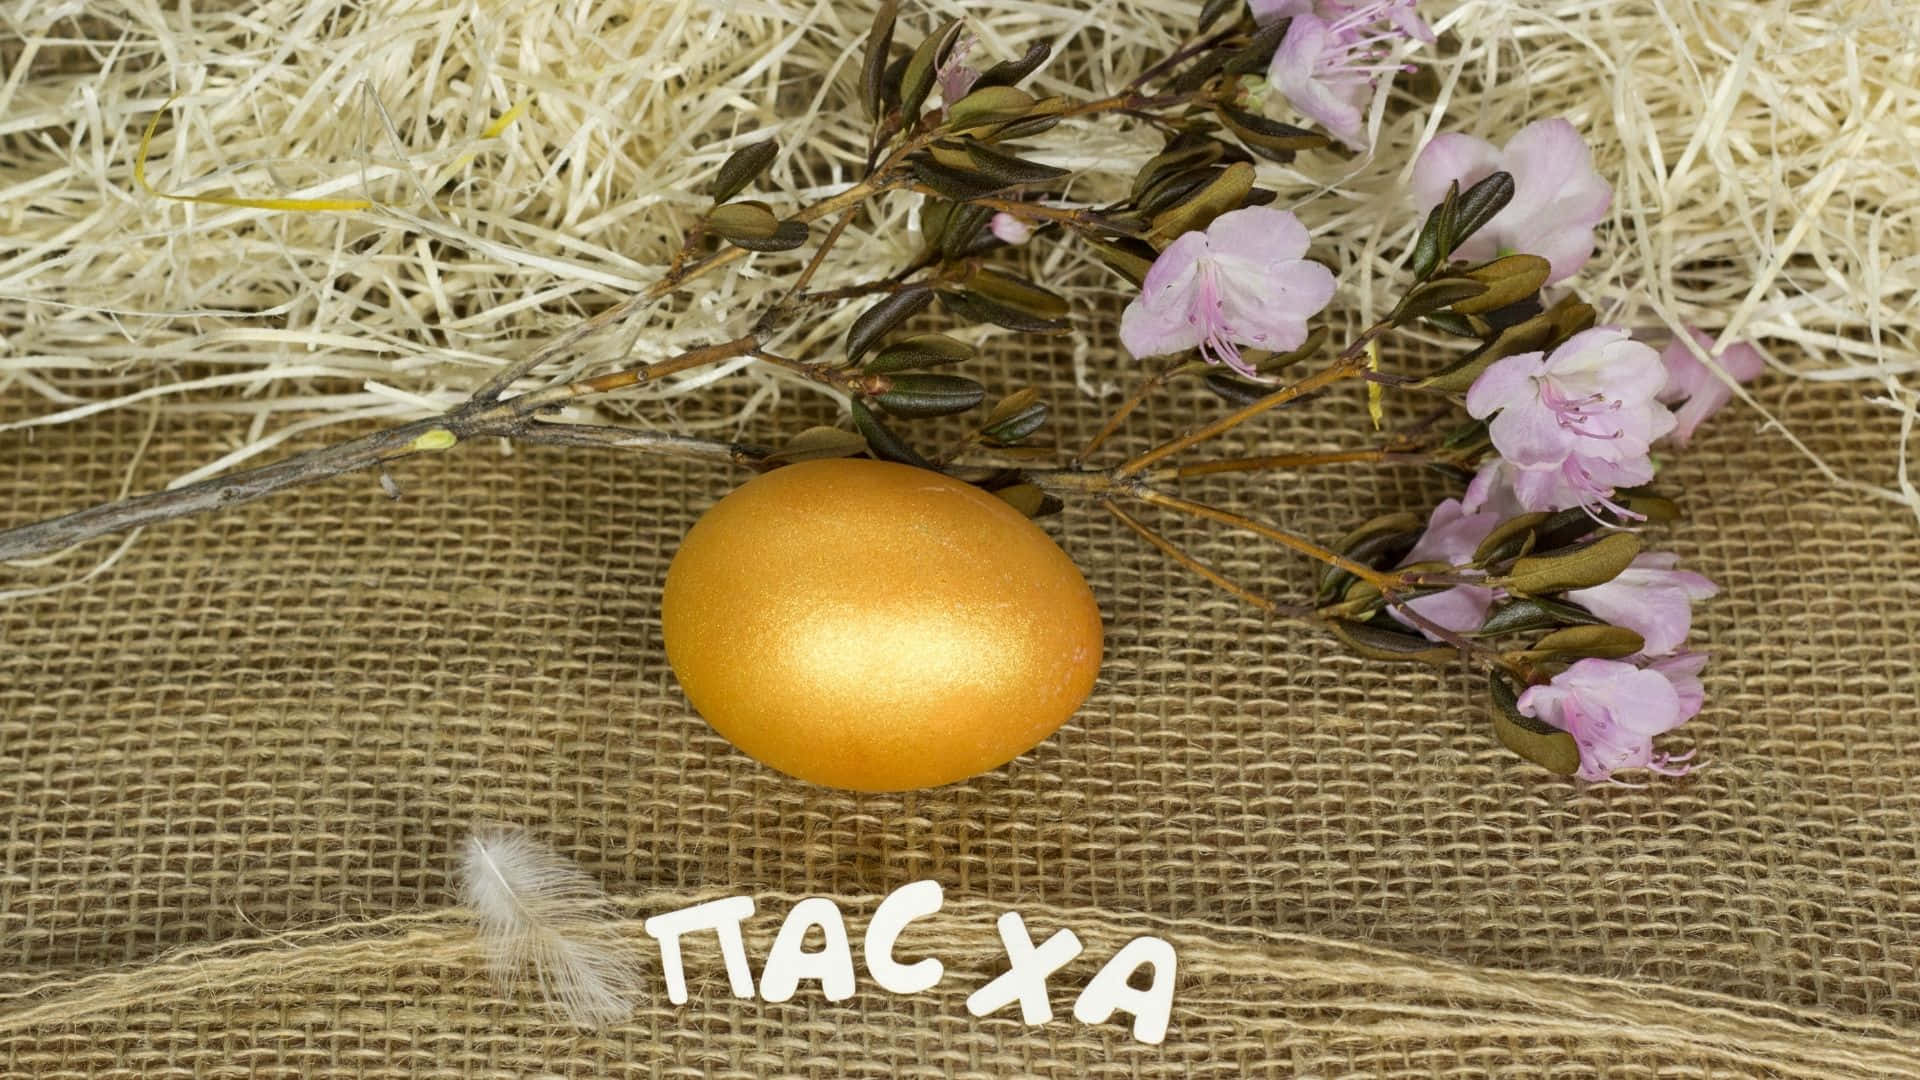 A Golden Egg With Flowers And Hay On A Sack Wallpaper